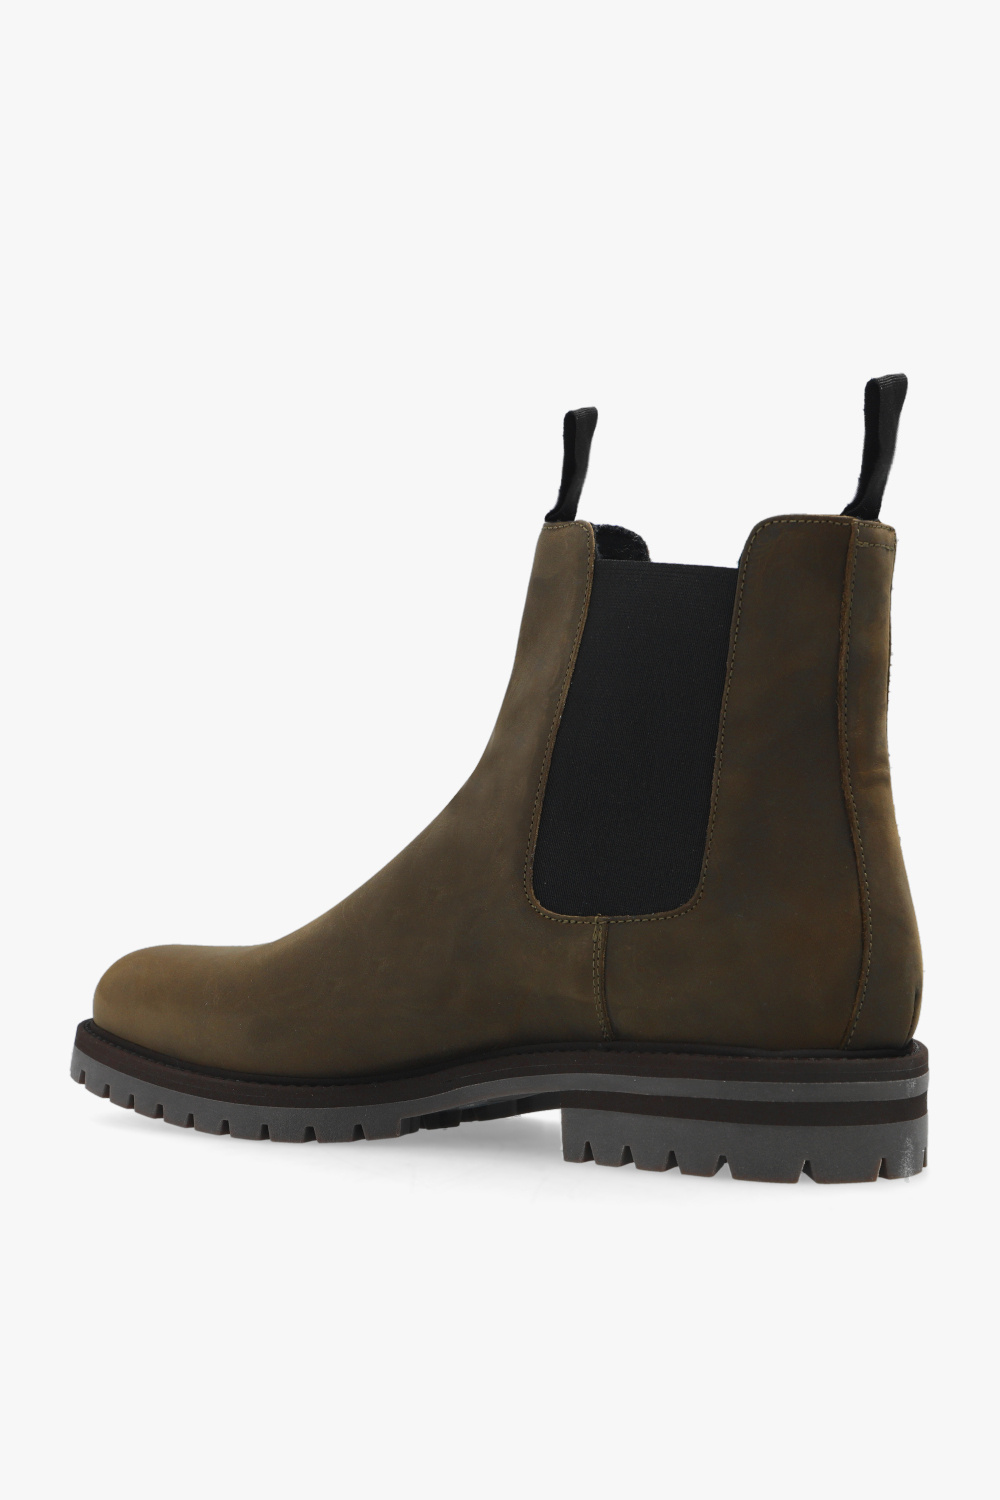 Common Projects ‘Winter’ Chelsea boots